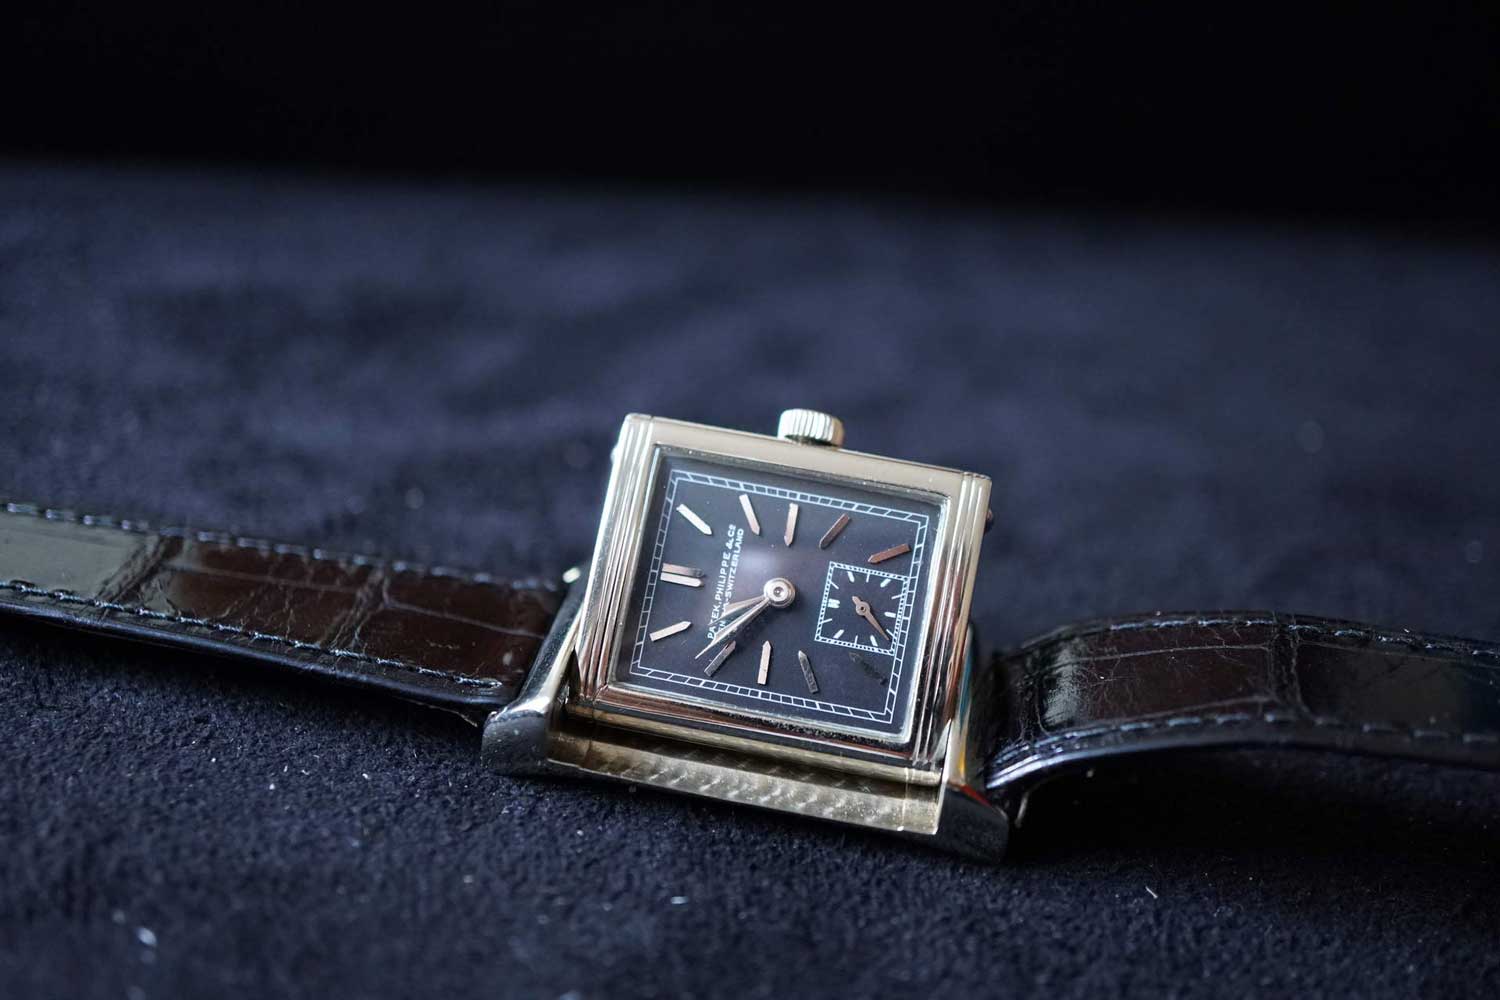 Between December 1931 and April 1932, Jaeger-LeCoultre built a handful of Reversos, eight in total, badged as Patek Philippes, with Jaeger-LeCoultre movements inside. (Image: le-monde-edmond.com)